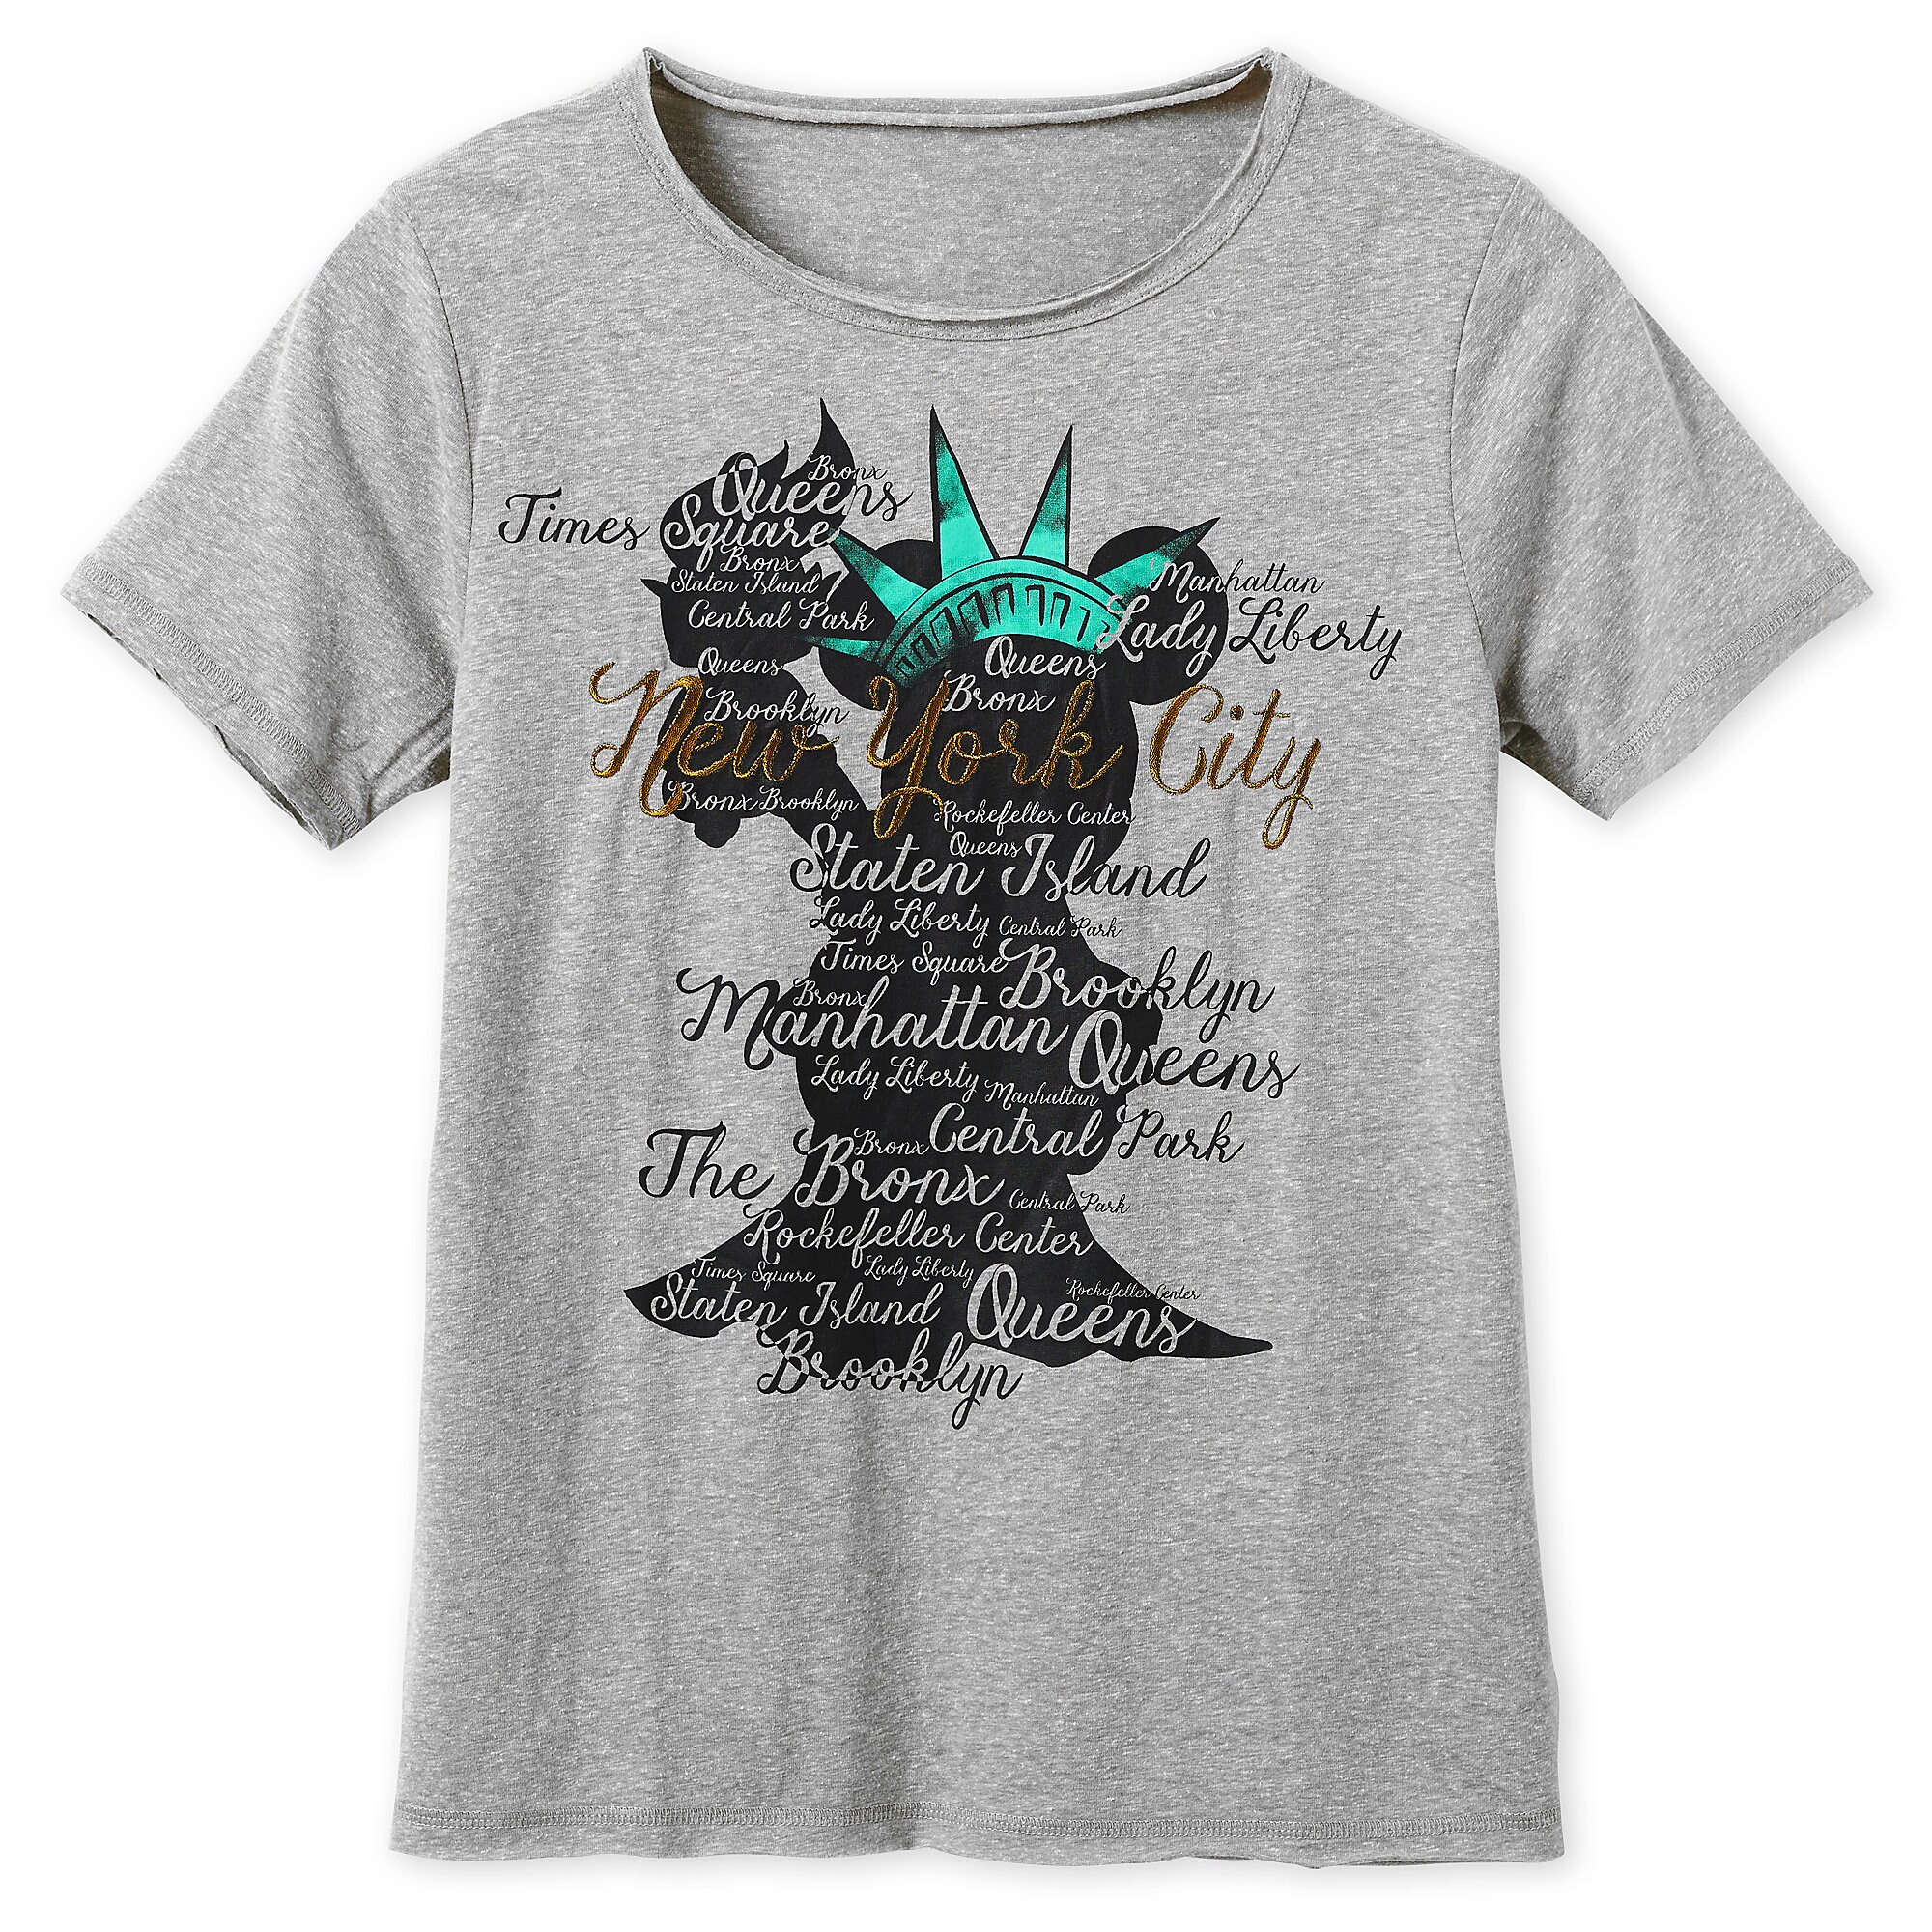 Minnie Mouse Statue of Liberty Crown T-Shirt for Women - New York City